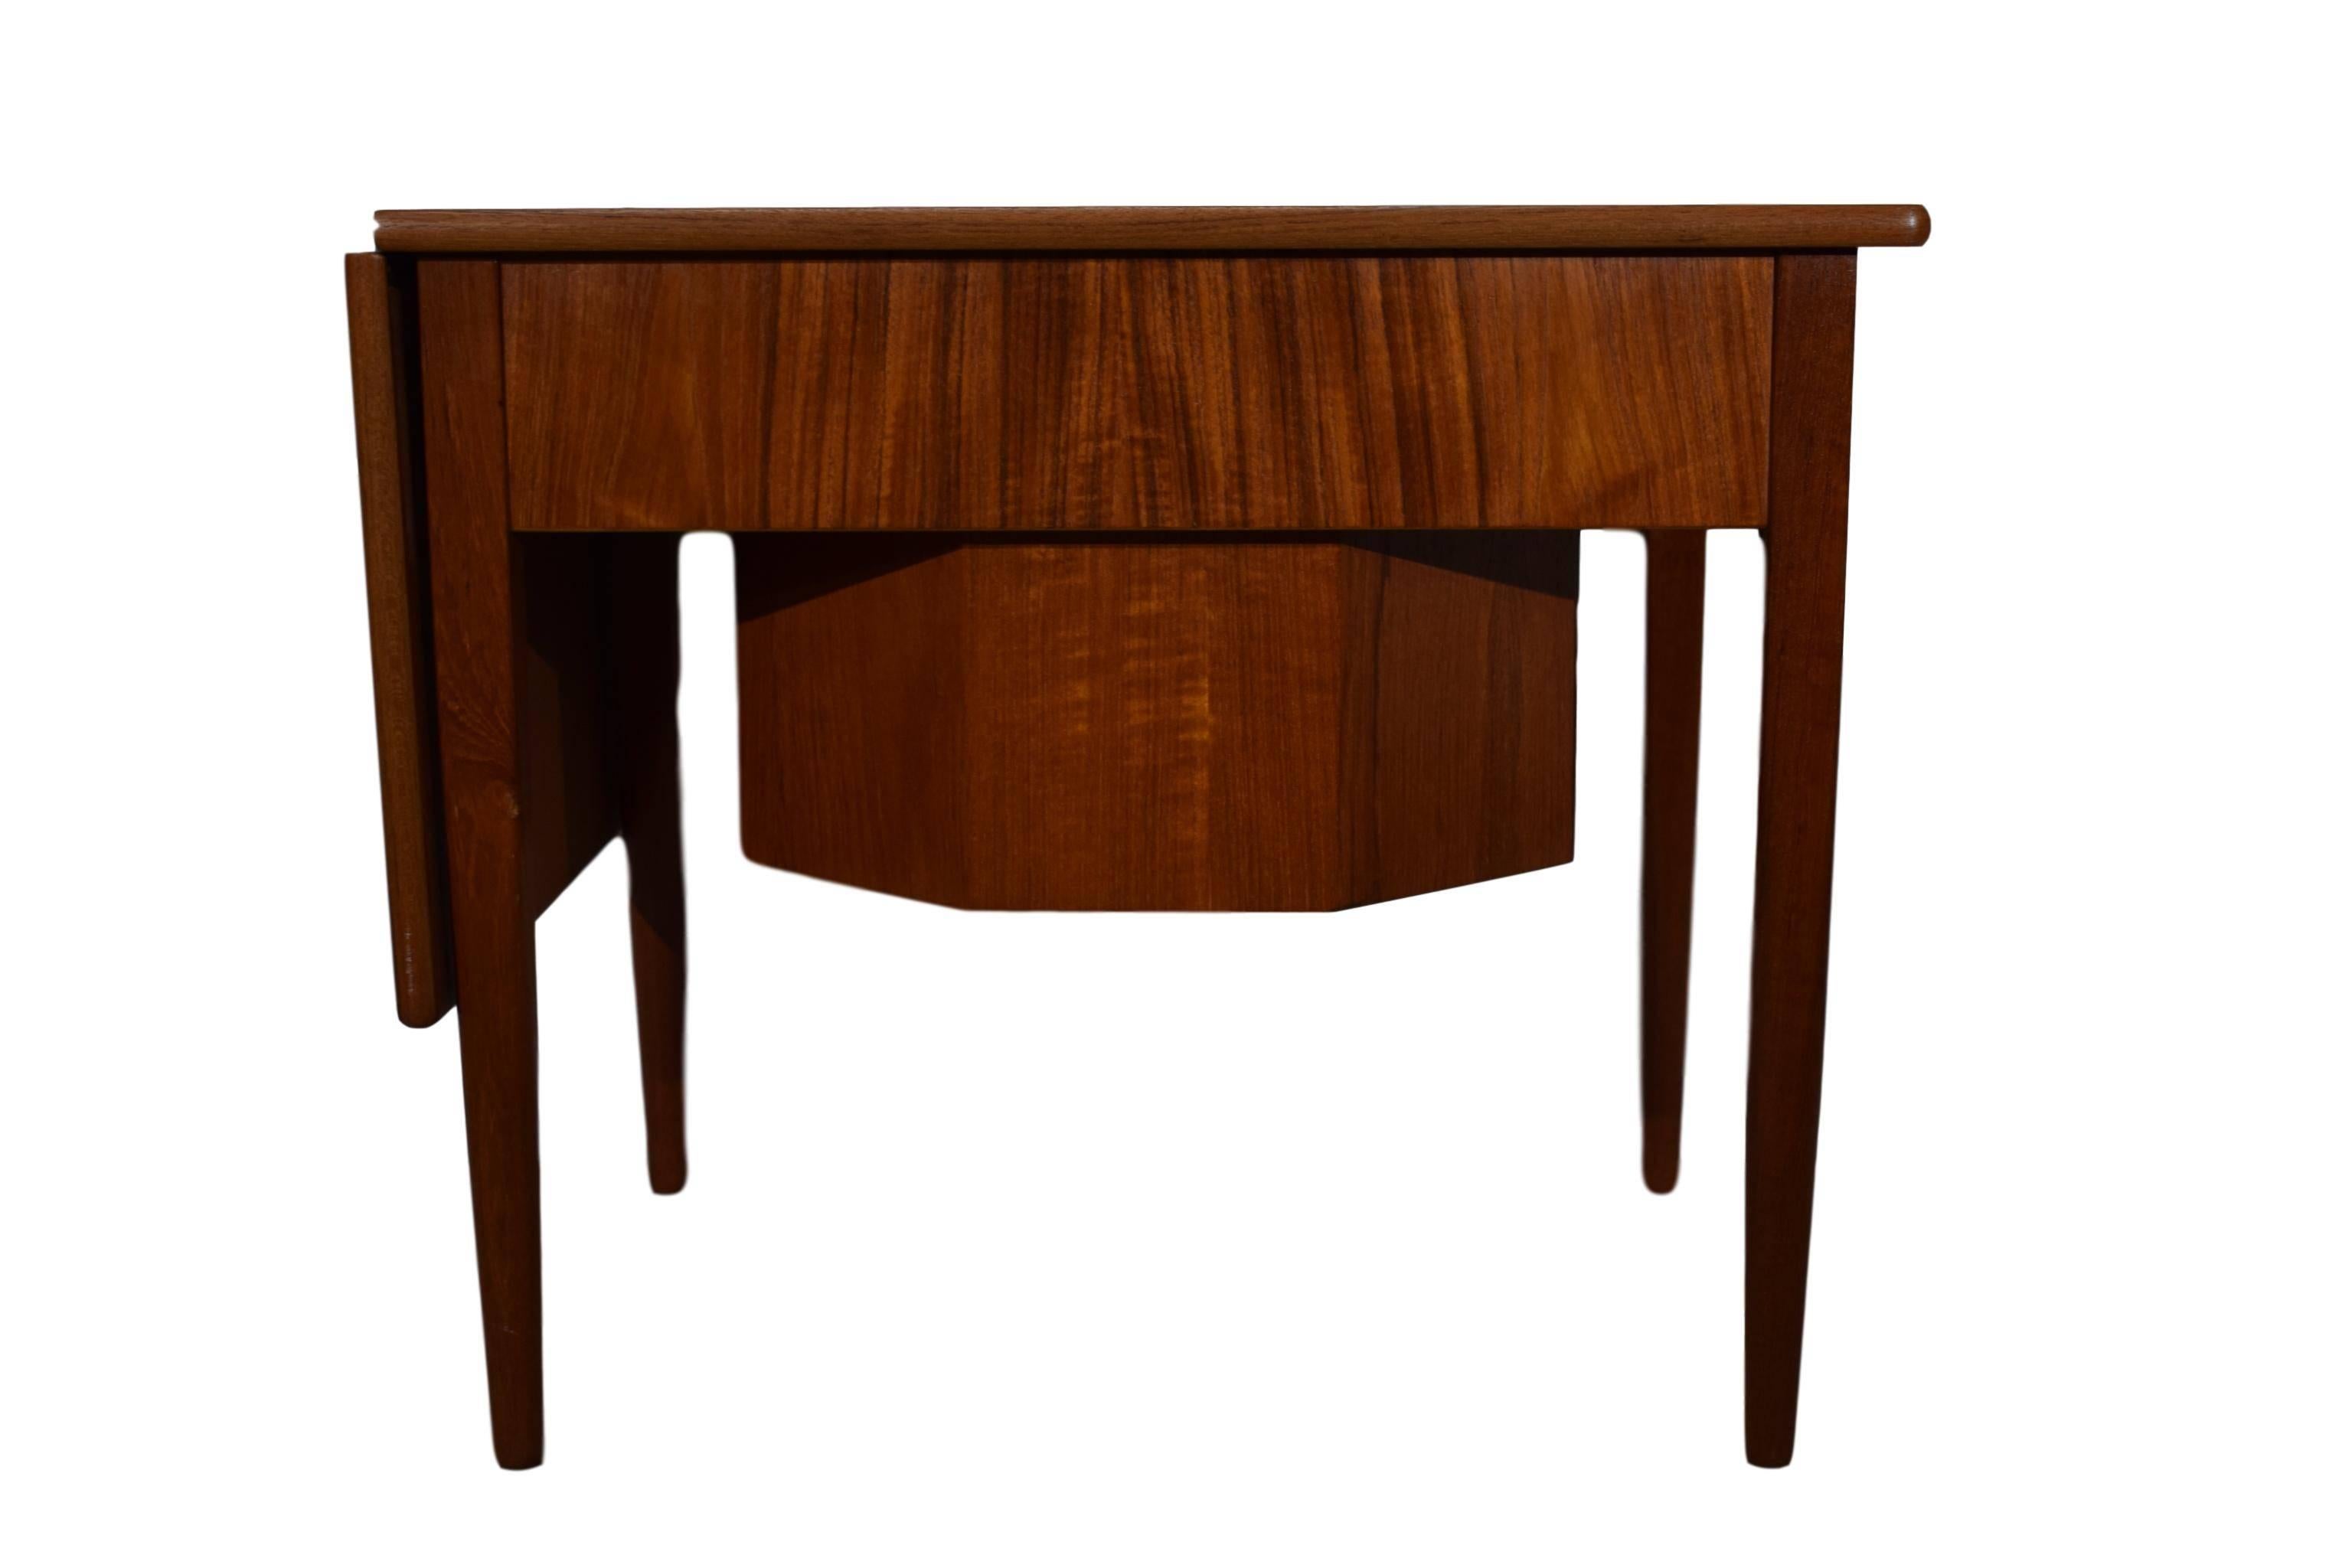 Danish Midcentury Sewing Table with Drop-Leaf by Johannes Andersen, Teak In Excellent Condition For Sale In Denmark, DK